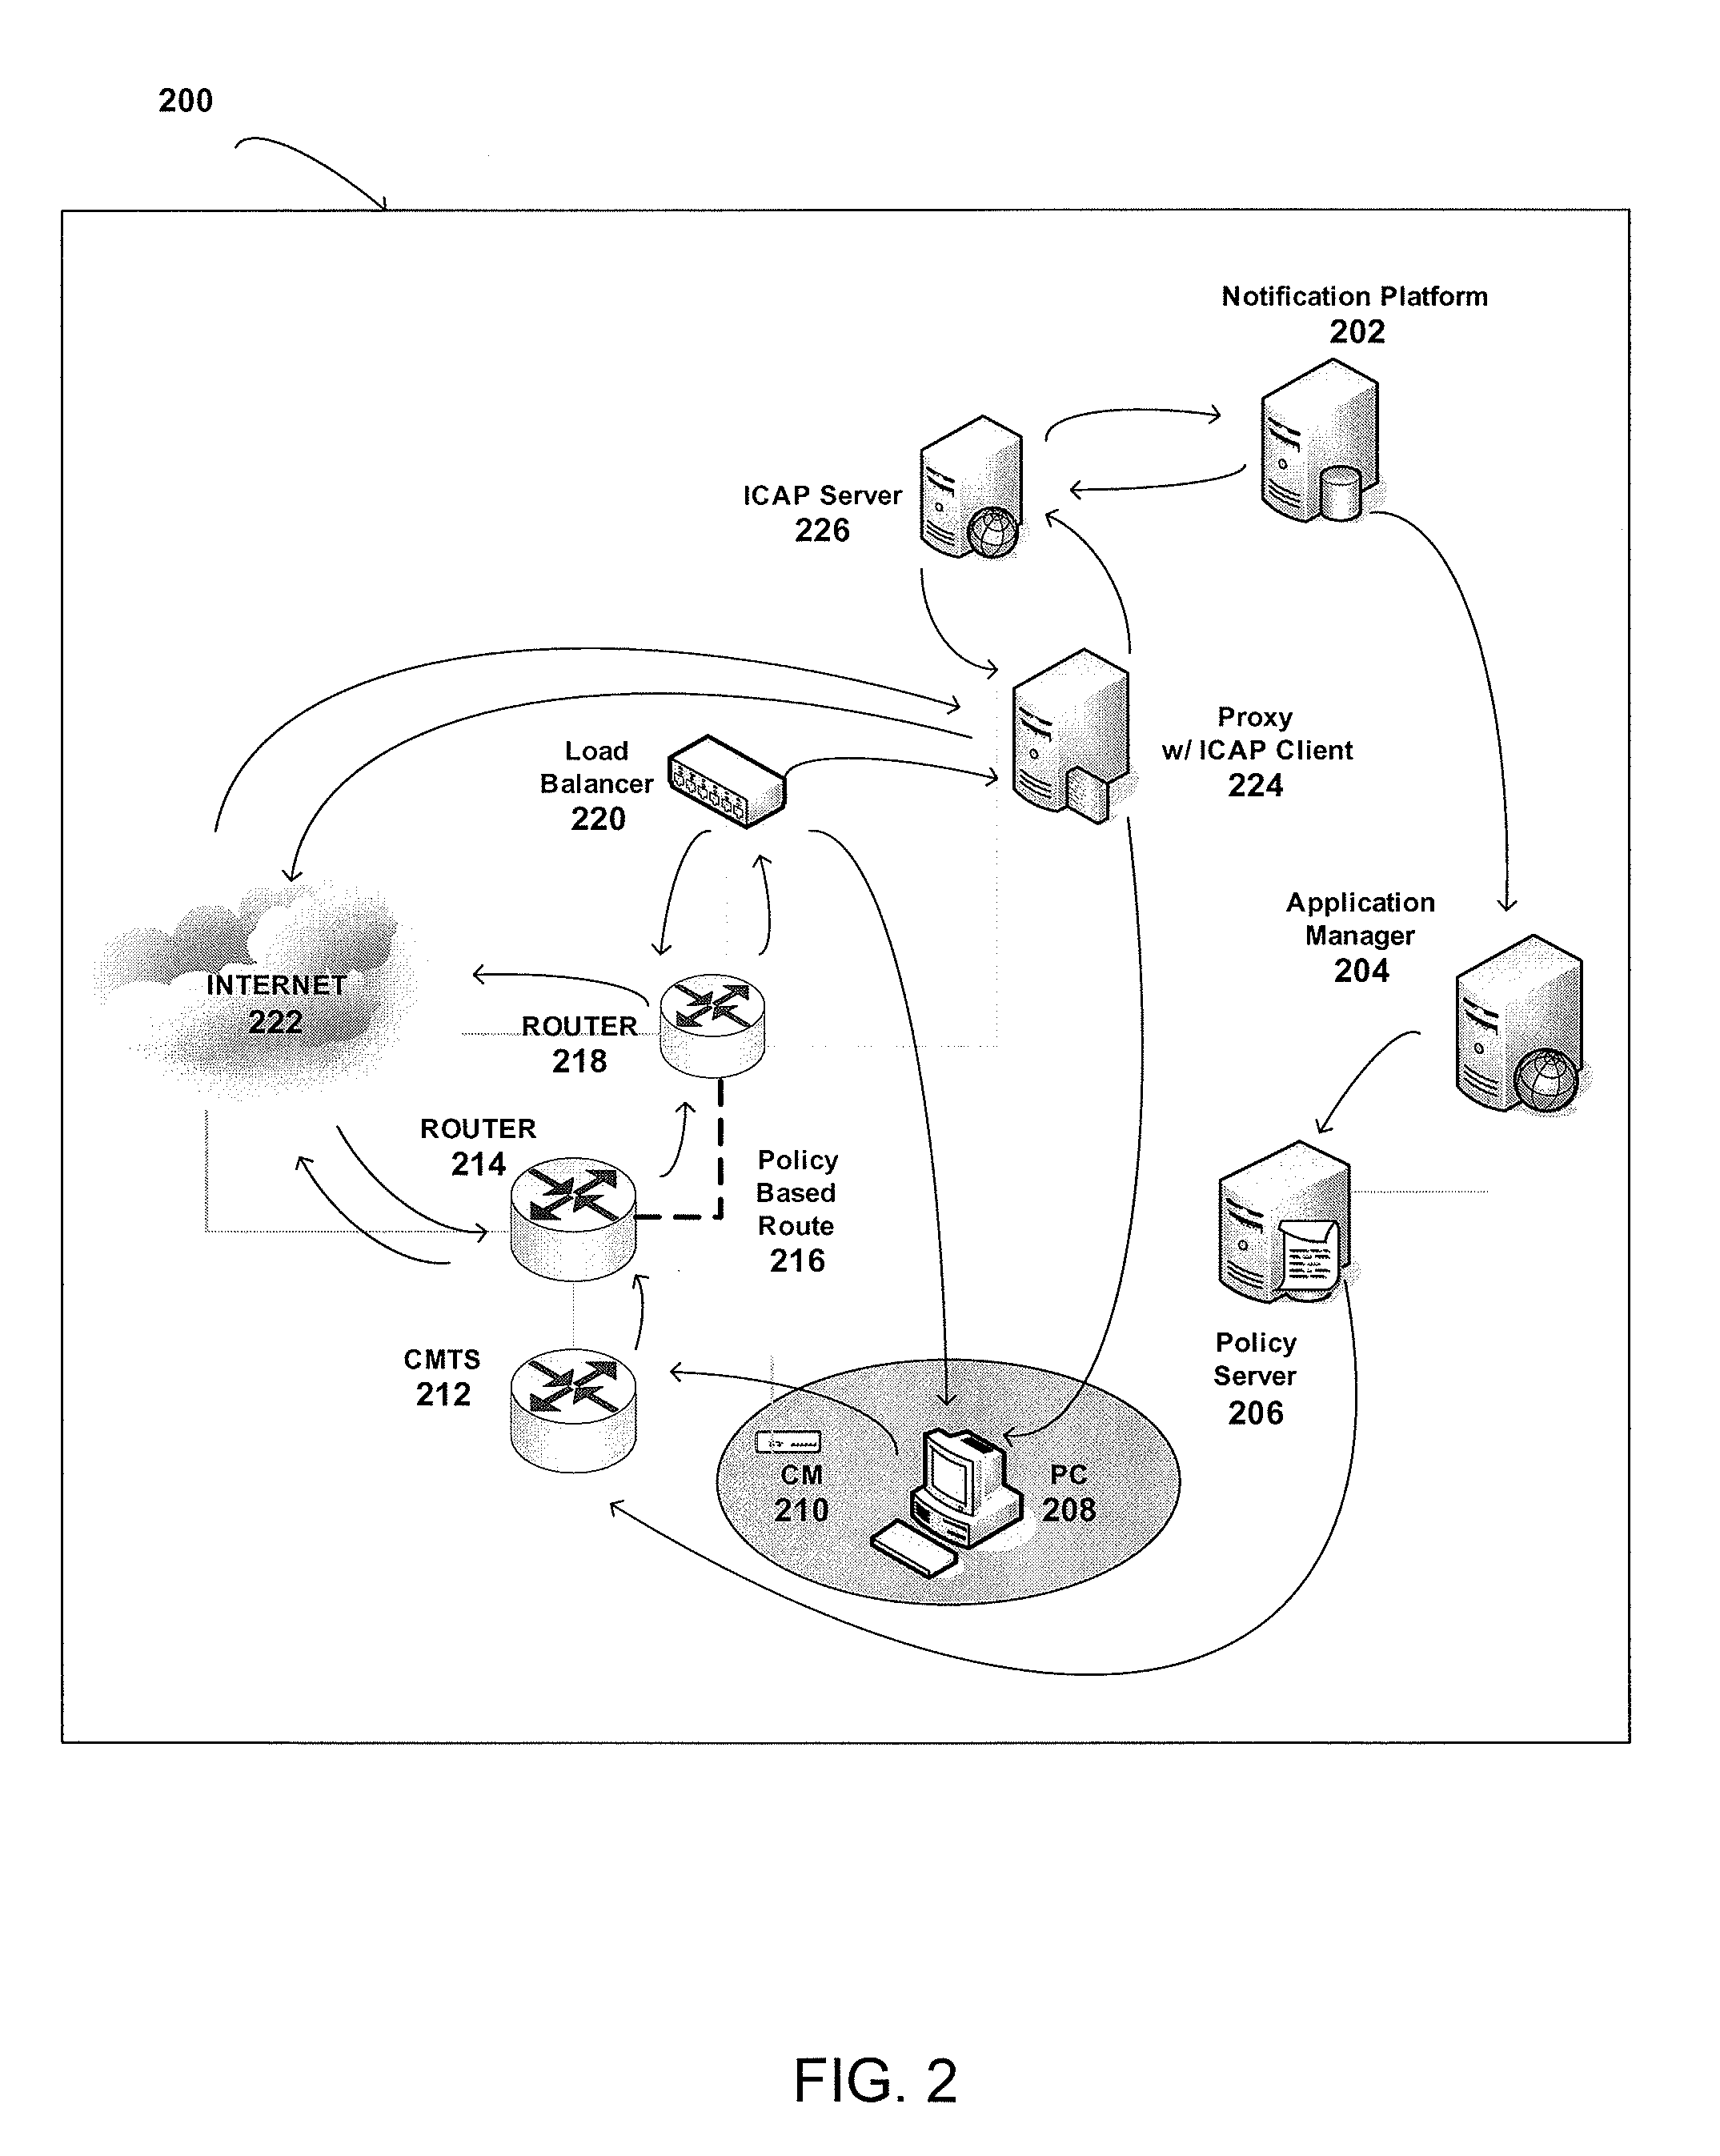 System and method for improved in-browser notification